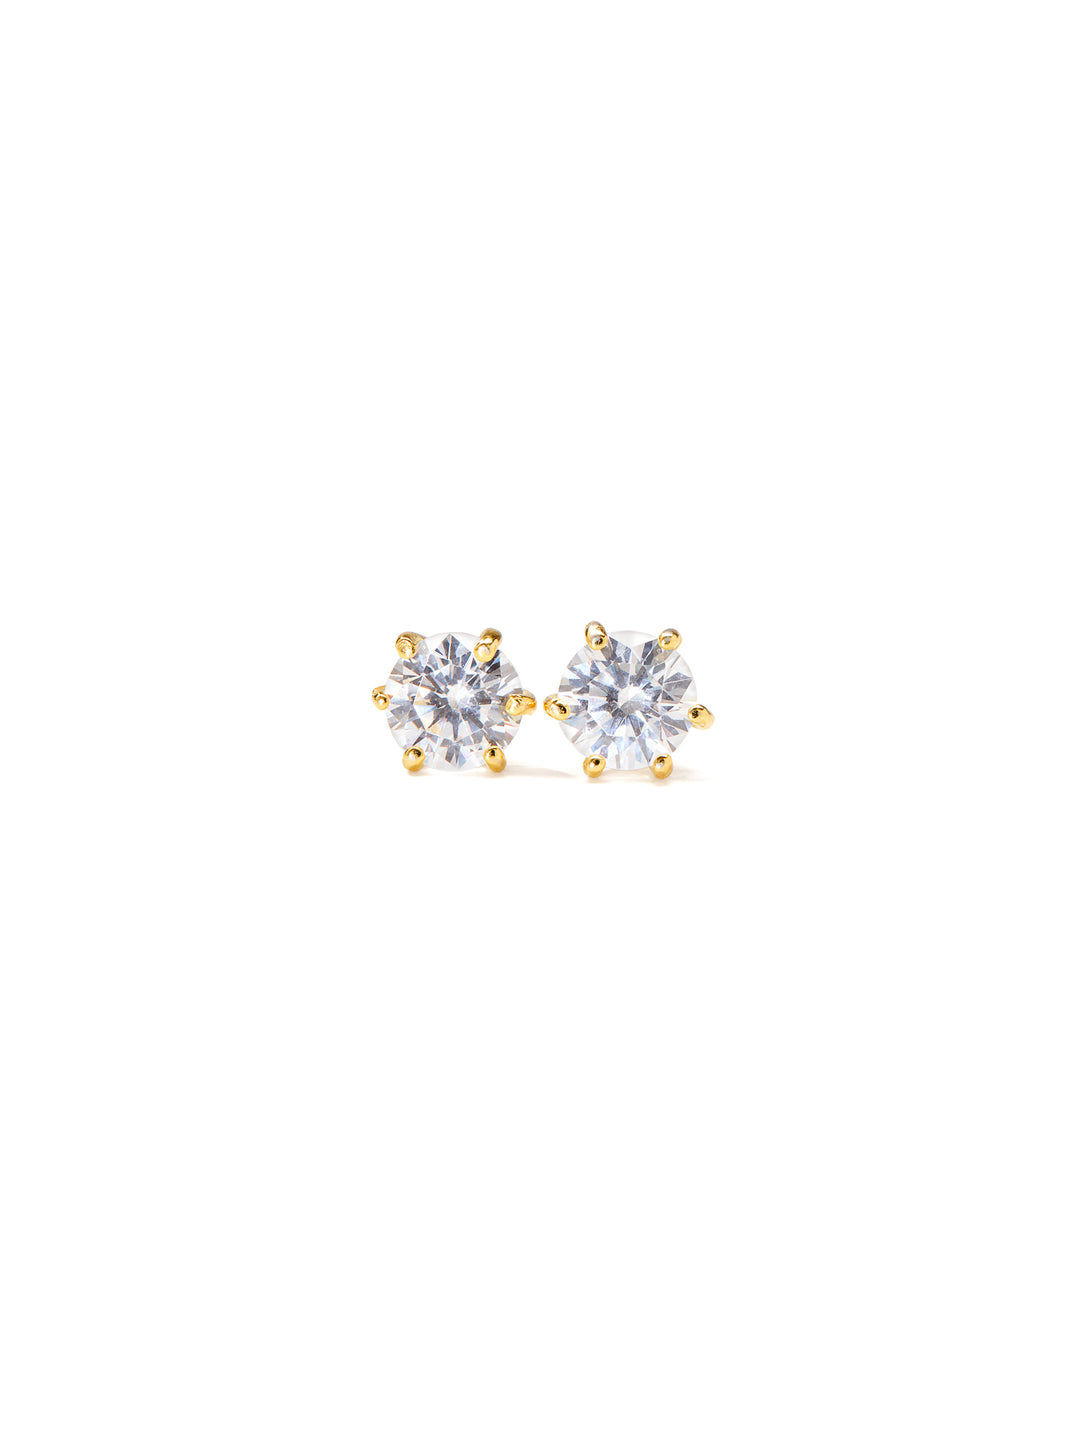 SET - ICONIC EAR CUFF and DAINTY EARRINGS • Color: 18K Yellow Gold